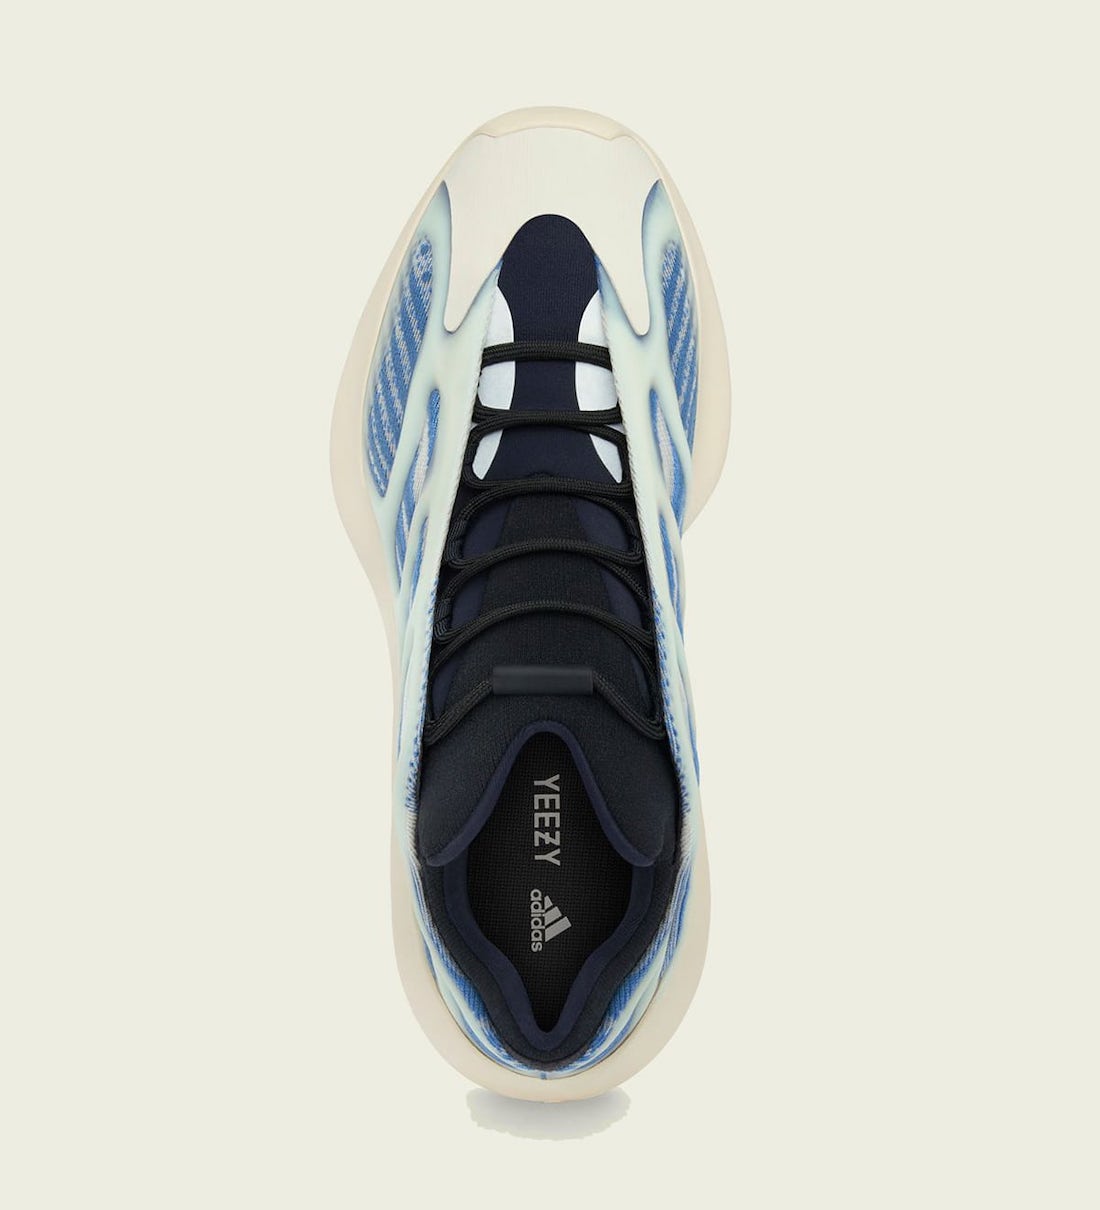 adidas-Yeezy-700-V3-Kyanite-GY0260-Release-Date-3